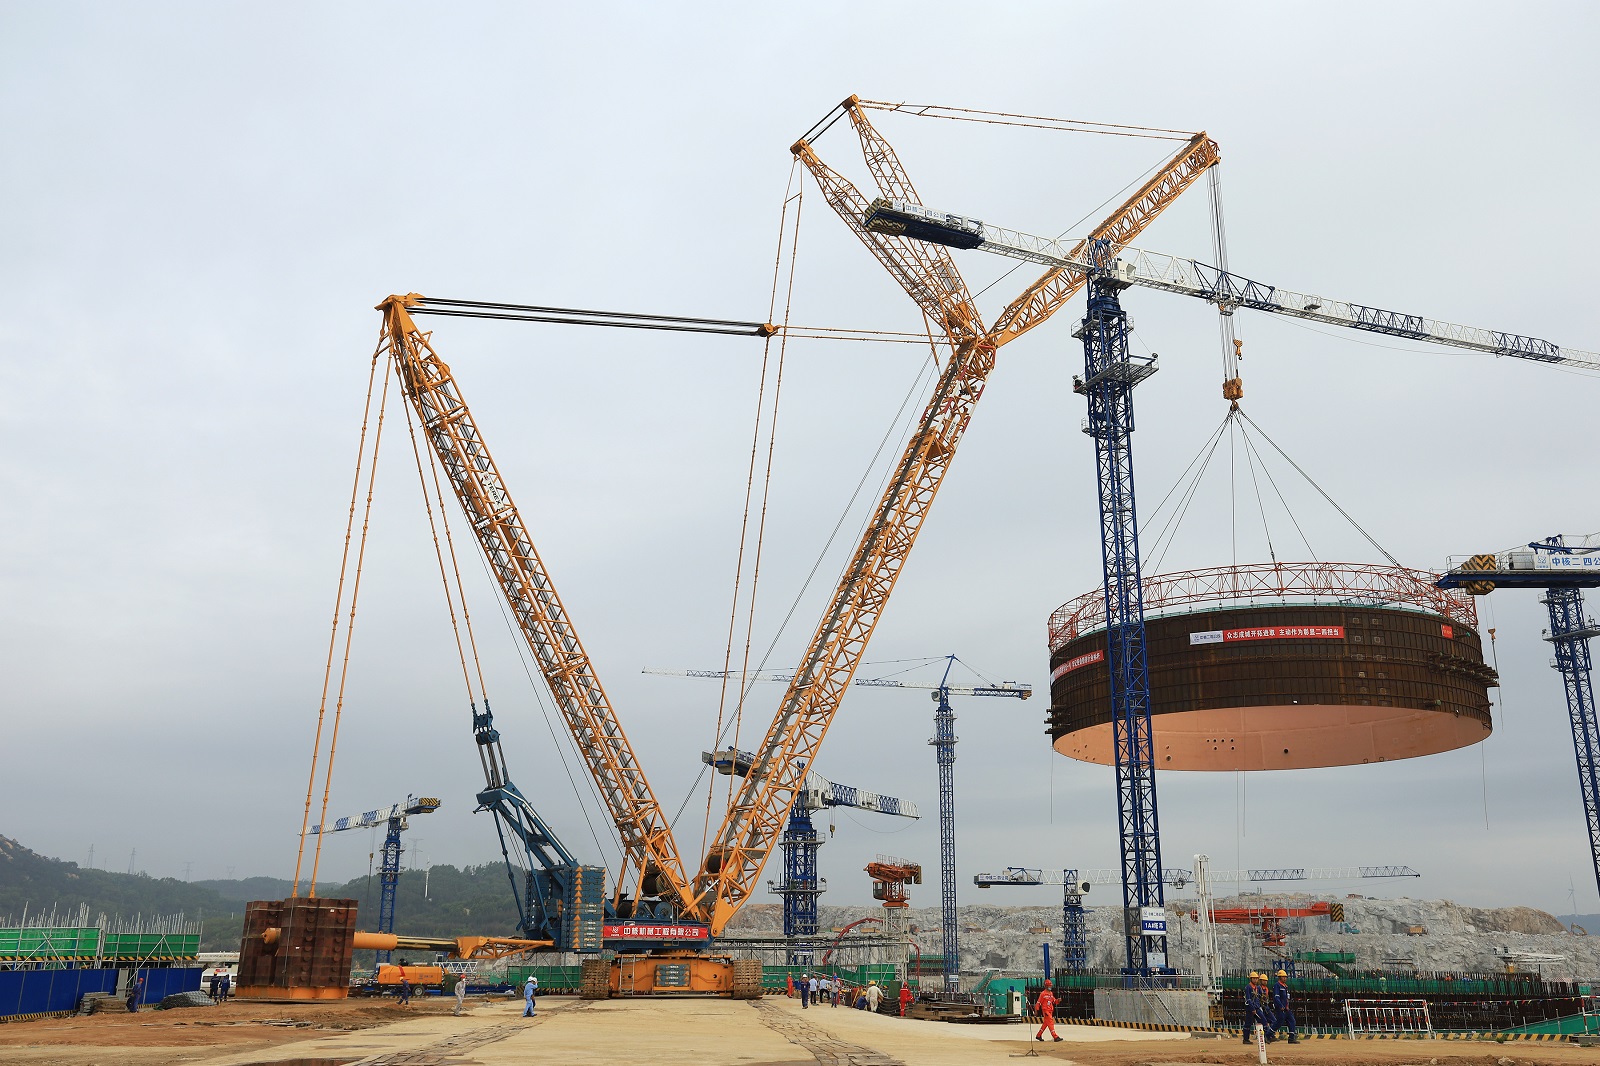 SARENS - Sarens CC8800-1 Crane Takes Leading Role at Chinese Nuclear  Installation Site